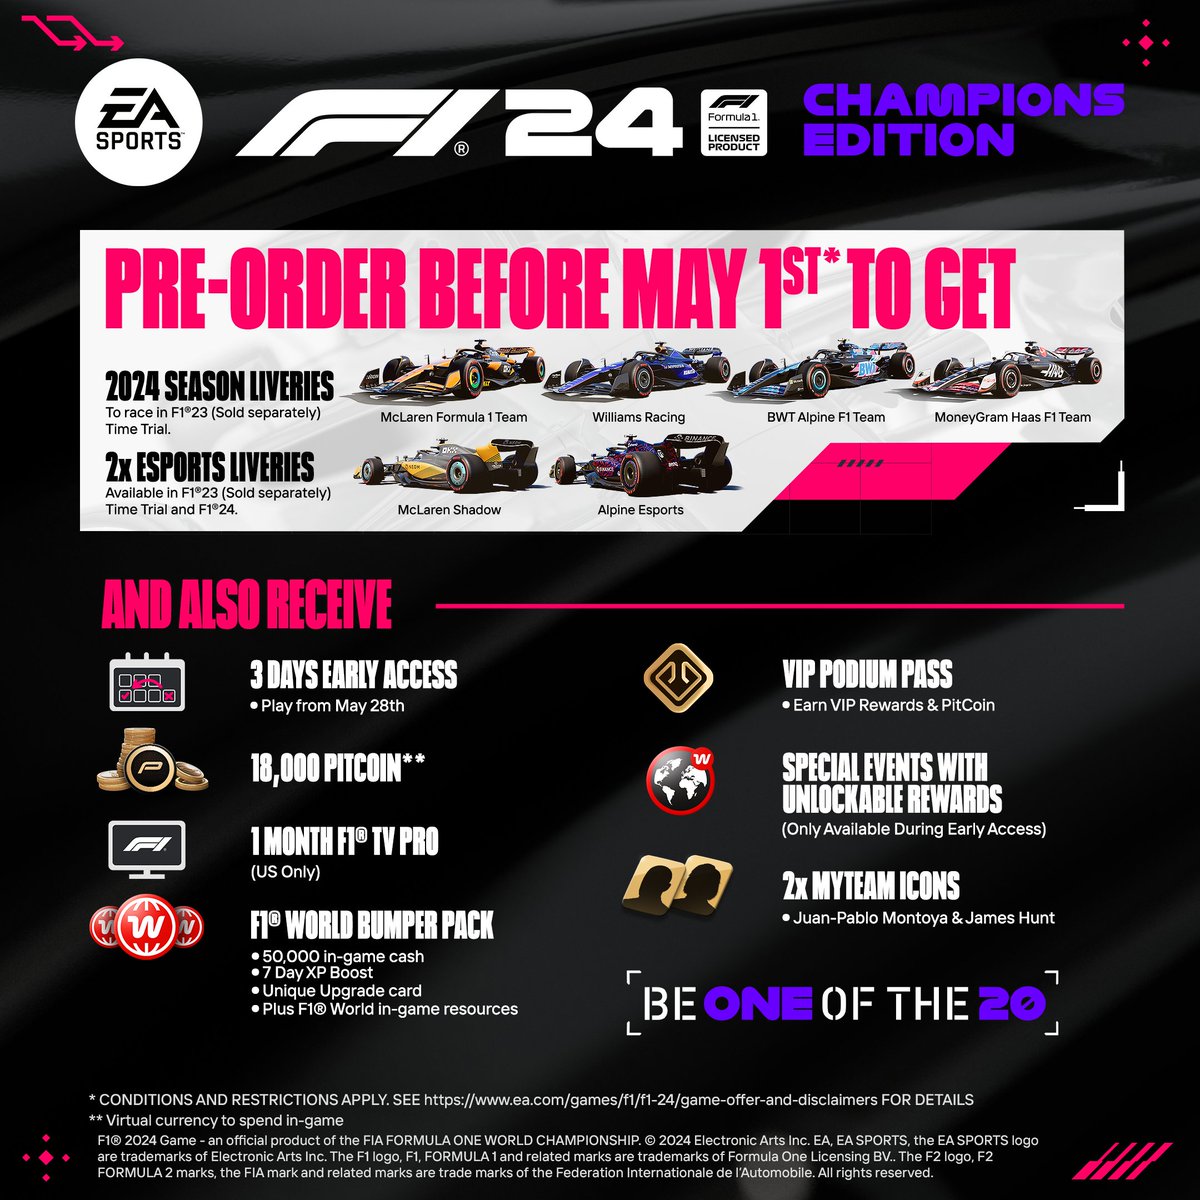 Today's your last chance to get these liveries in #F123 Time Trial, by pre-ordering #F124 Champions Edition 🎮 x.ea.com/79987